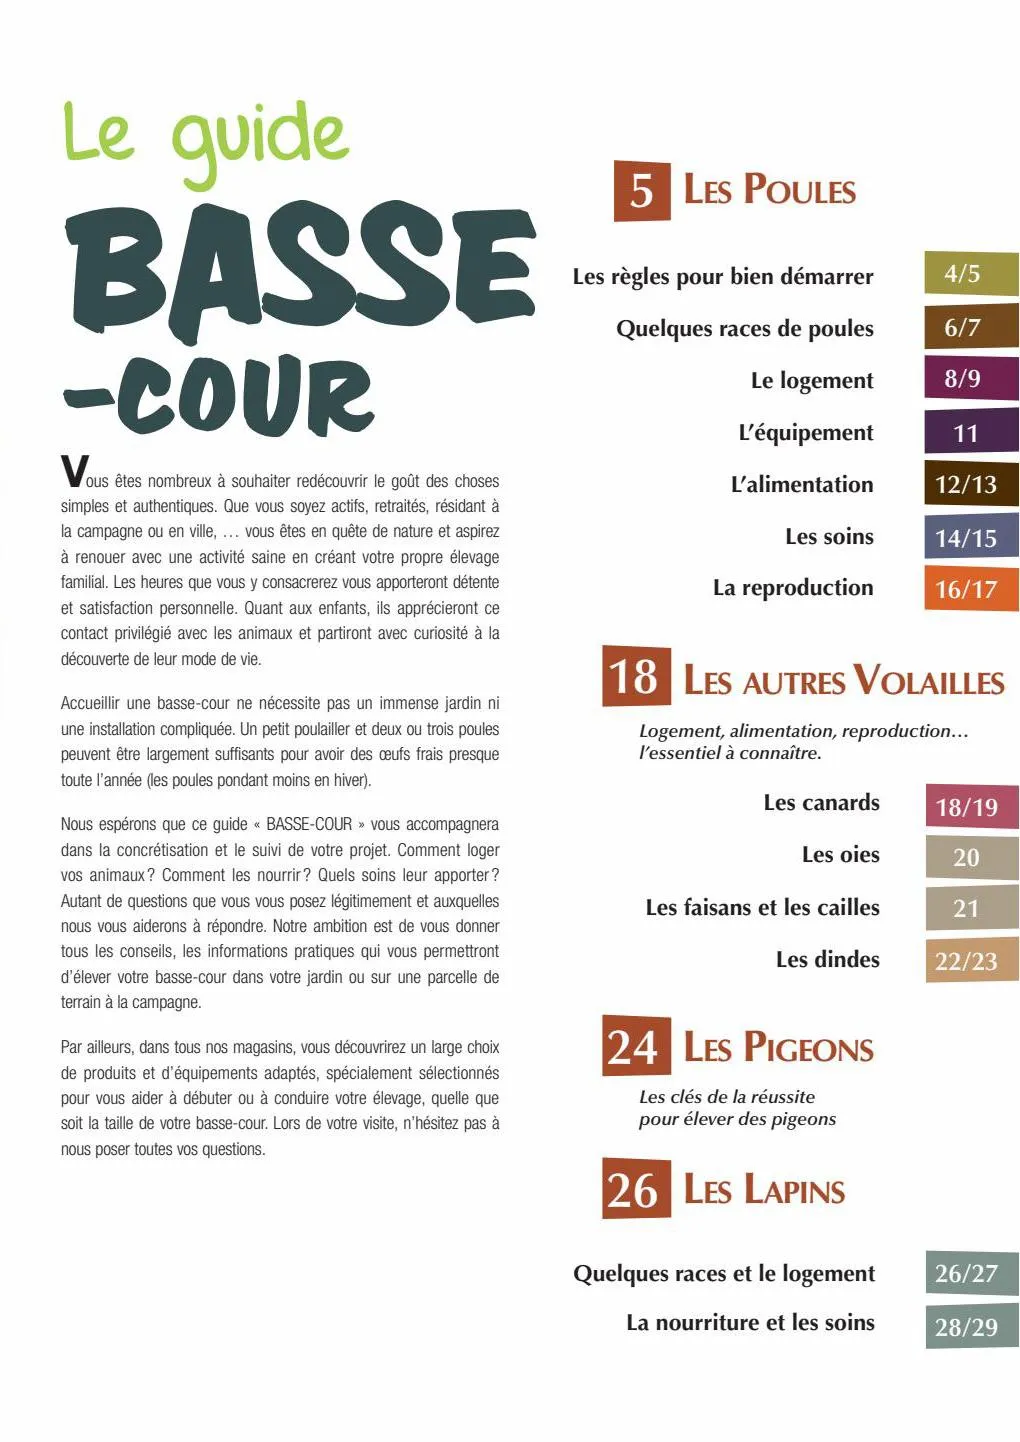 Catalogue Point Vert Guide Basse Cour, page 00003